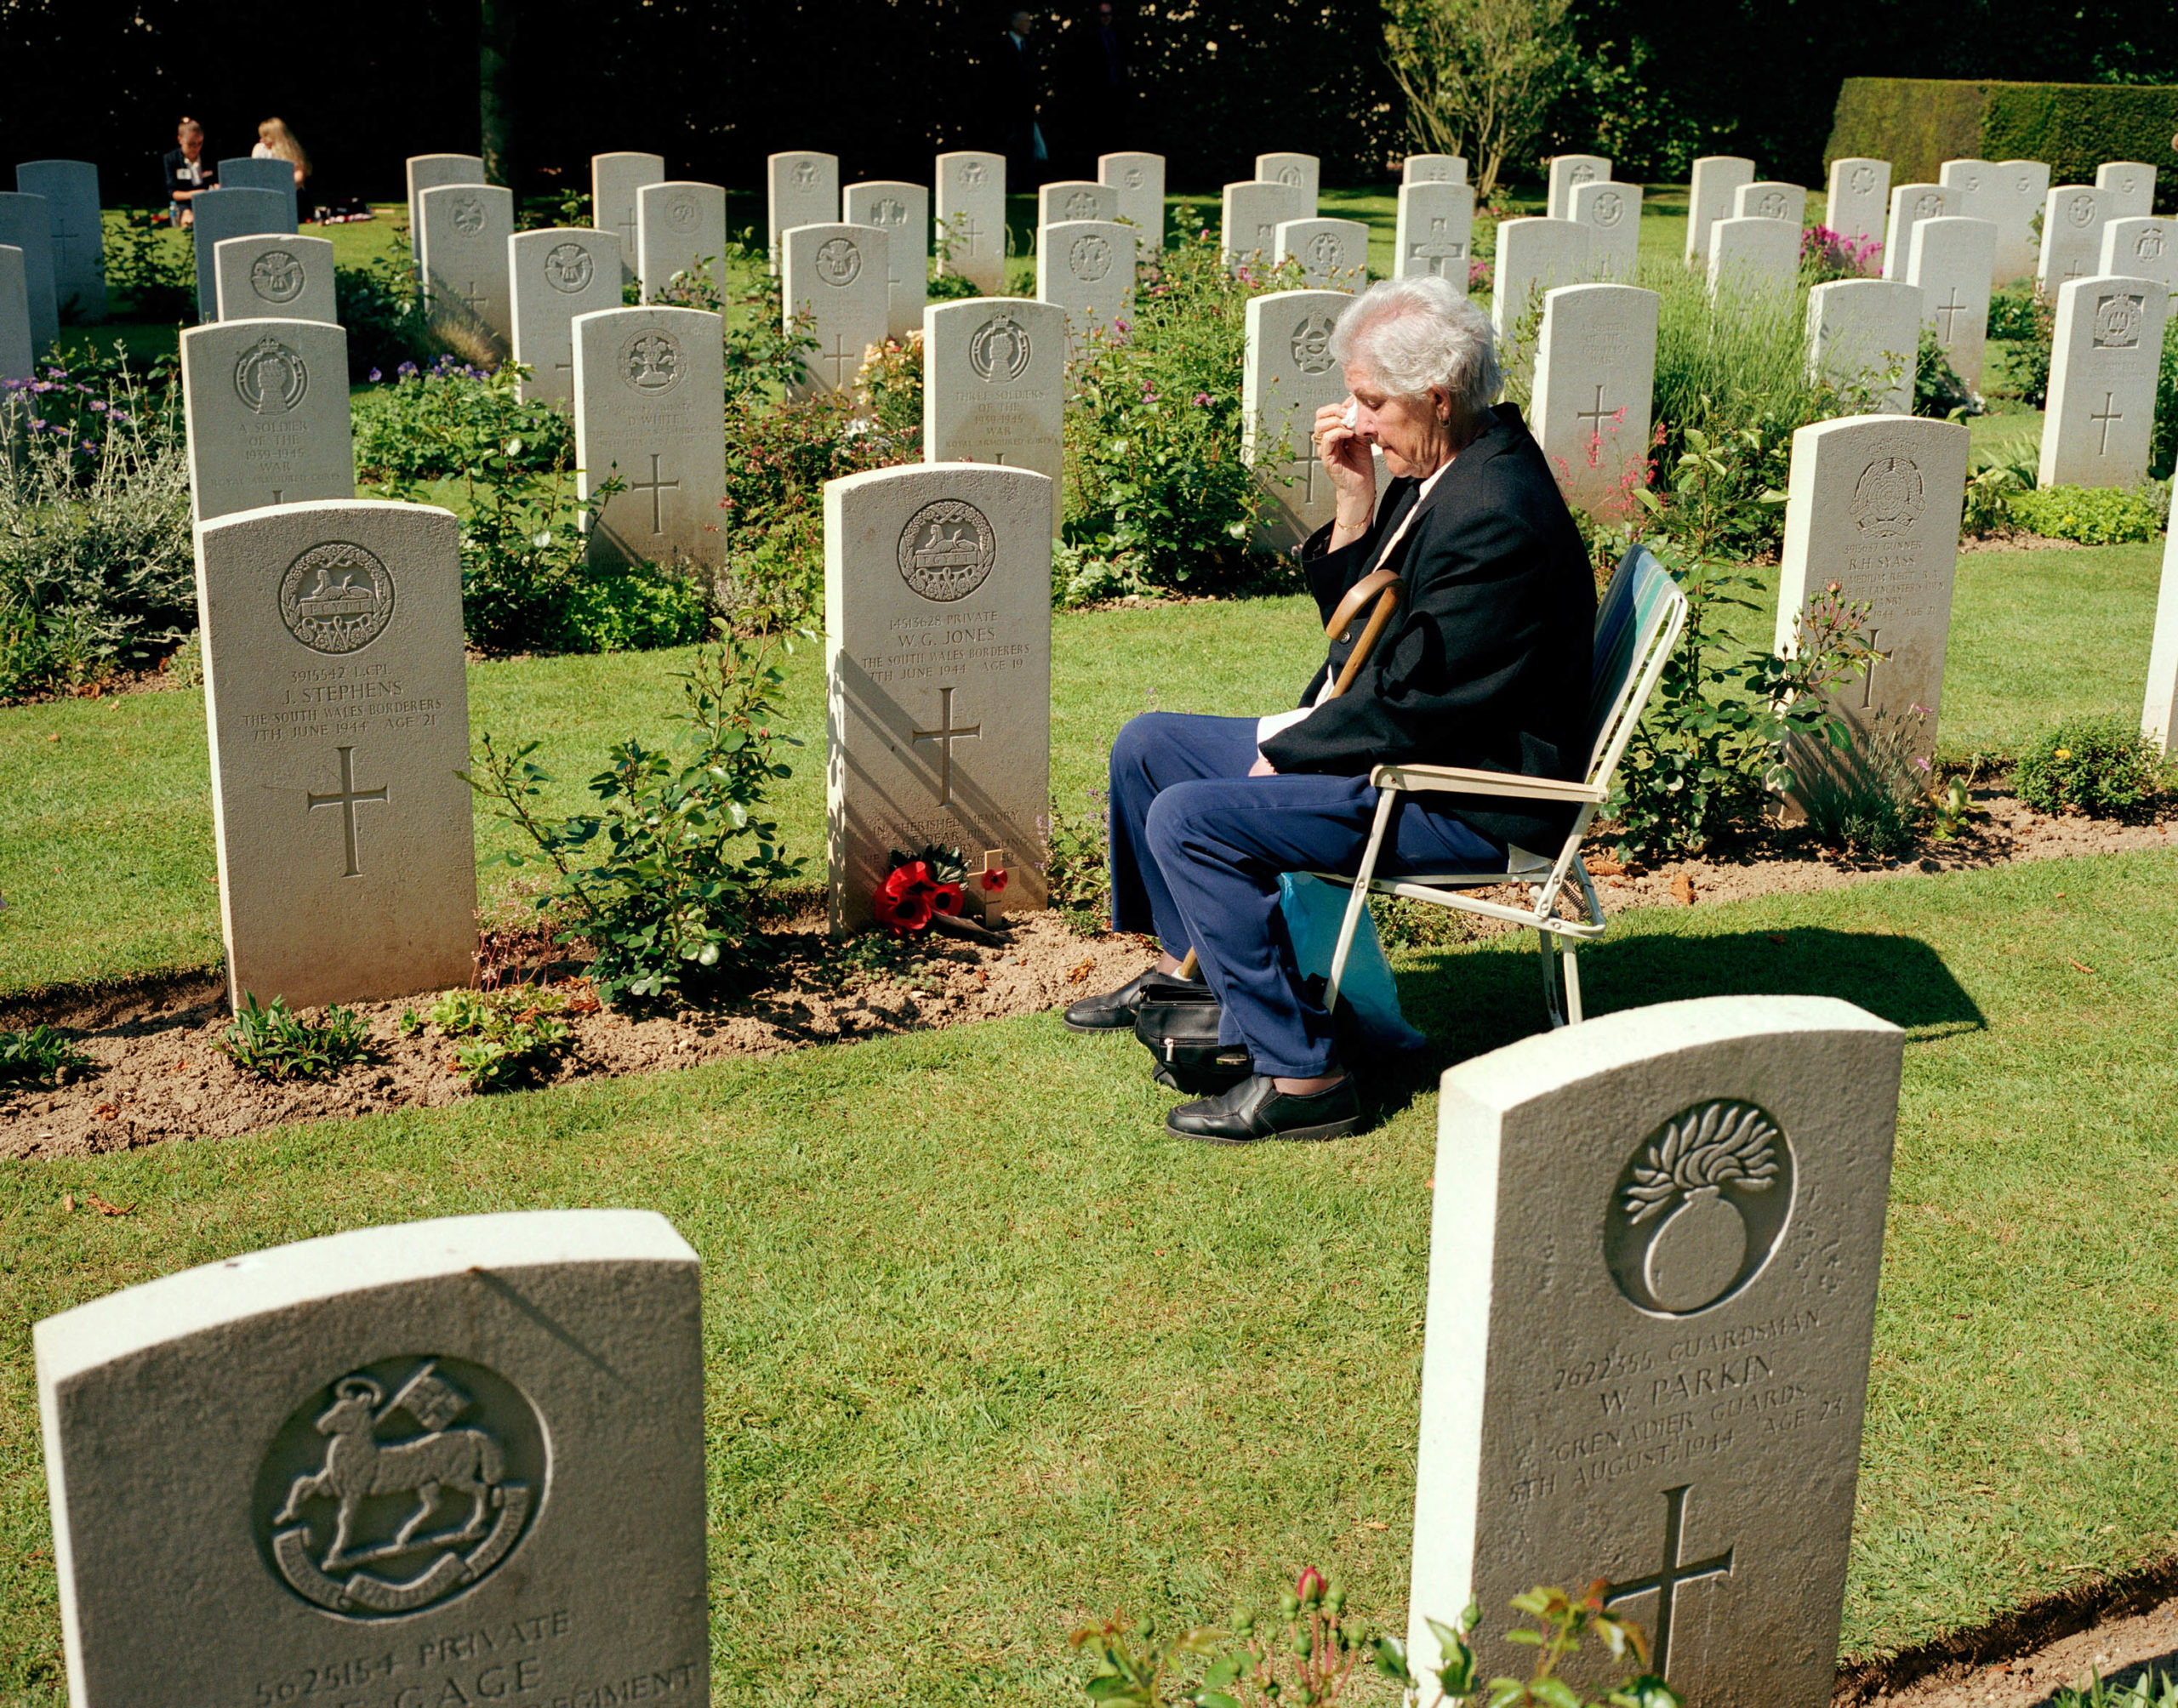 Normandy, Bayeux. D-Day celebrations. A British woman mourns at the grave of her brother, who was killed on 7 June 1944. 